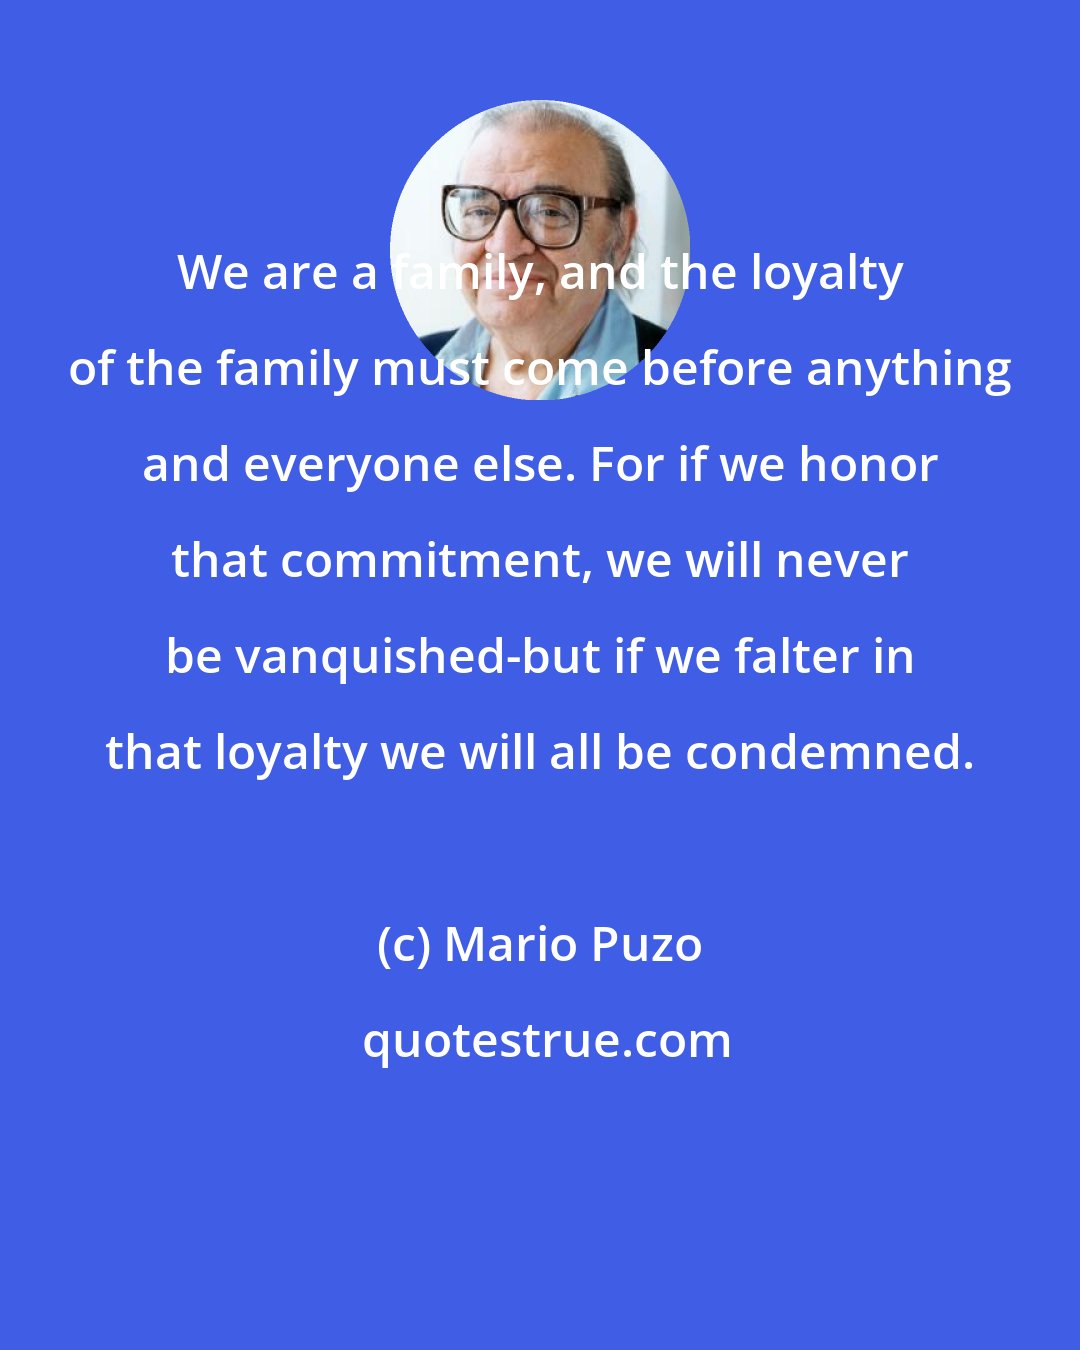 Mario Puzo: We are a family, and the loyalty of the family must come before anything and everyone else. For if we honor that commitment, we will never be vanquished-but if we falter in that loyalty we will all be condemned.